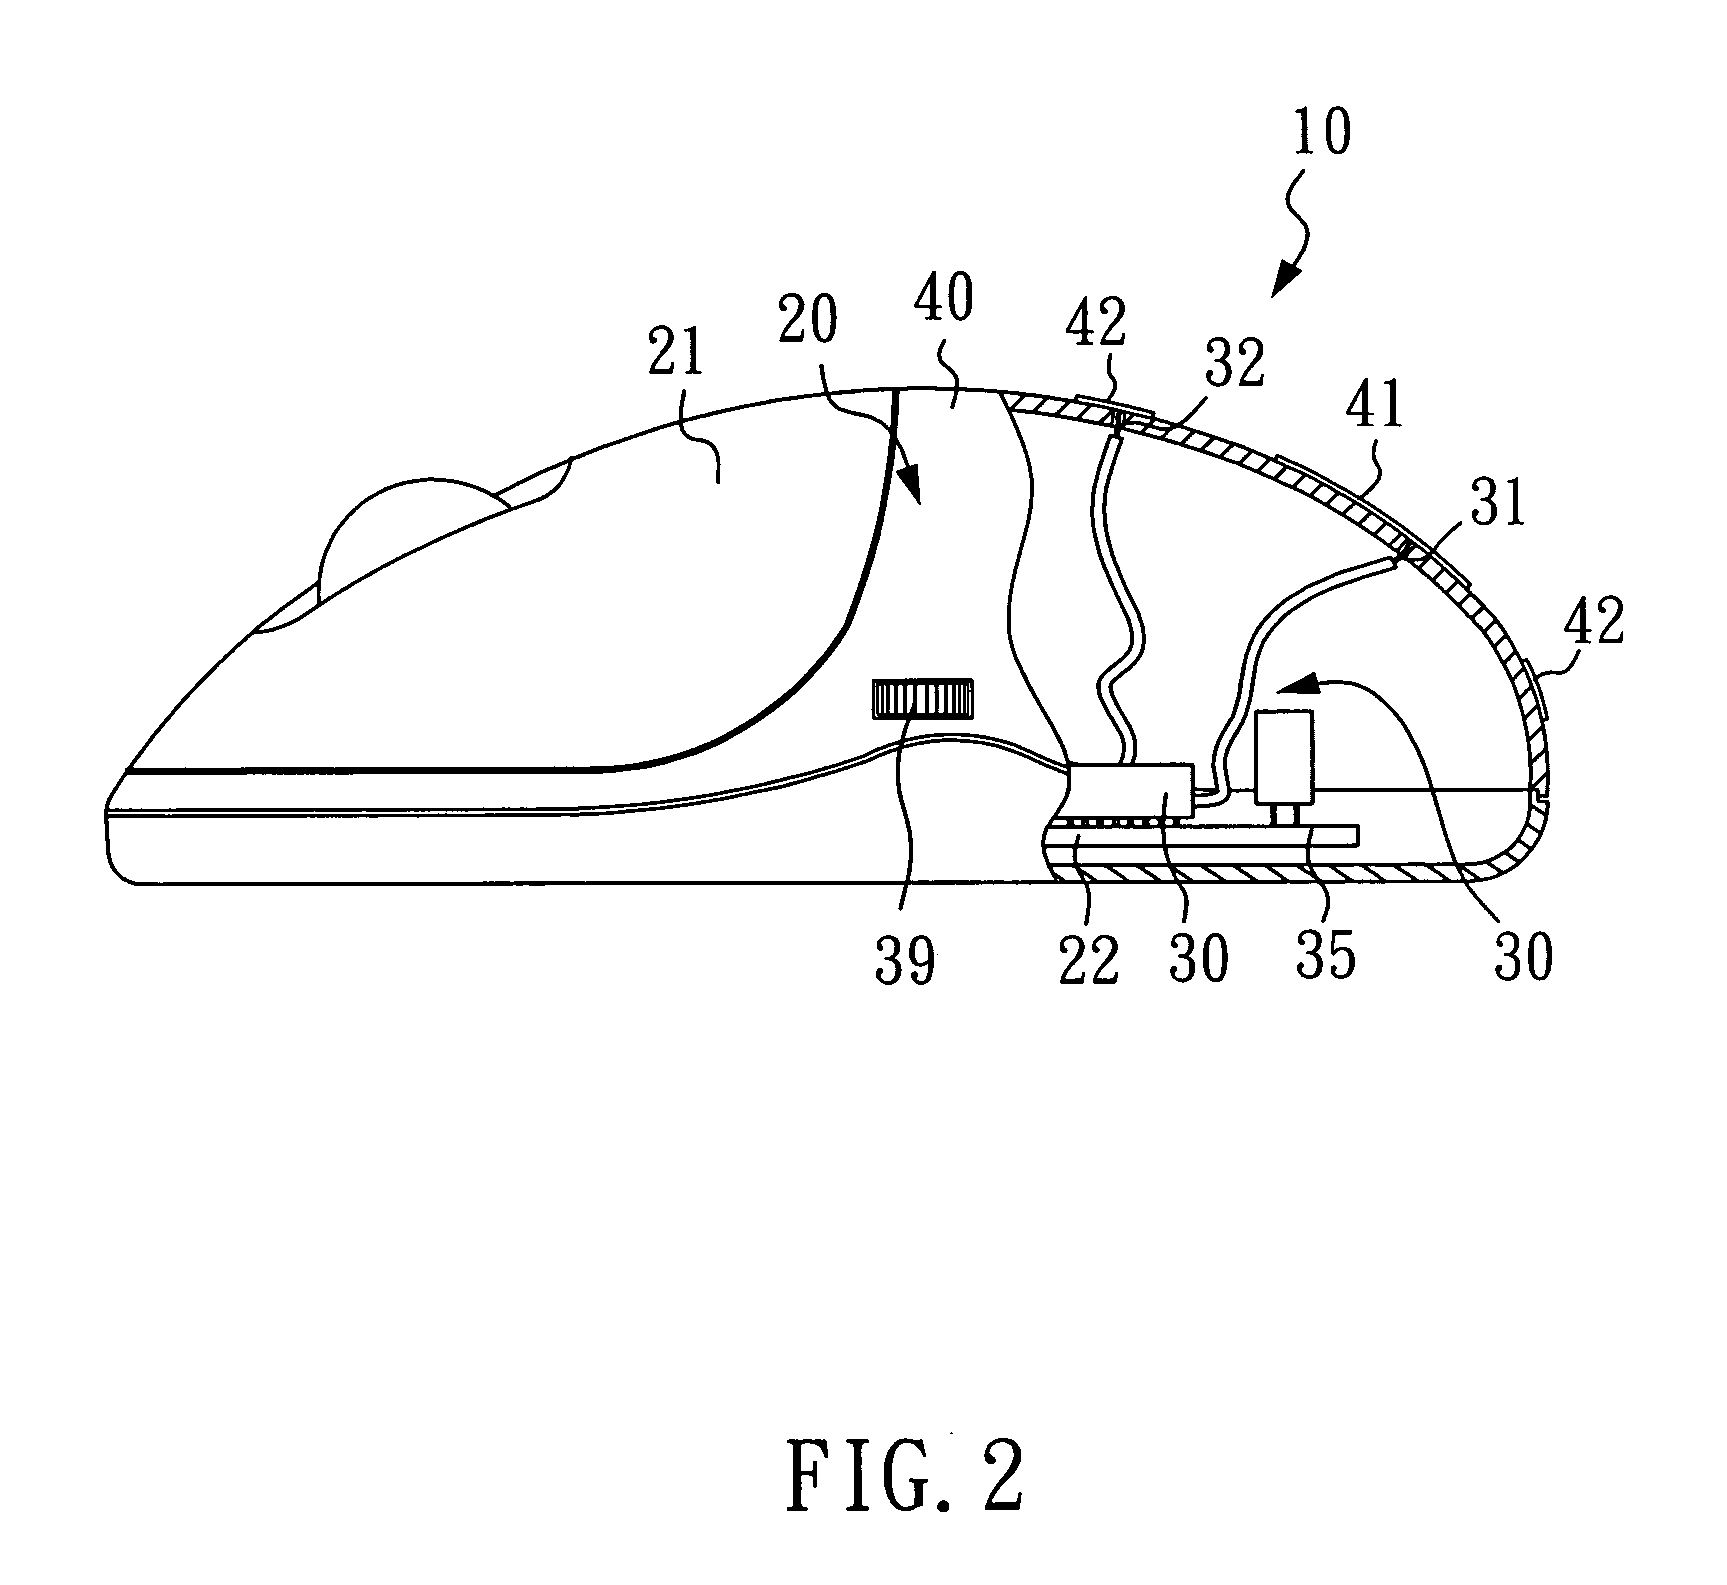 Computer mouse with transcutaneous electro nerve stimulation capabilities